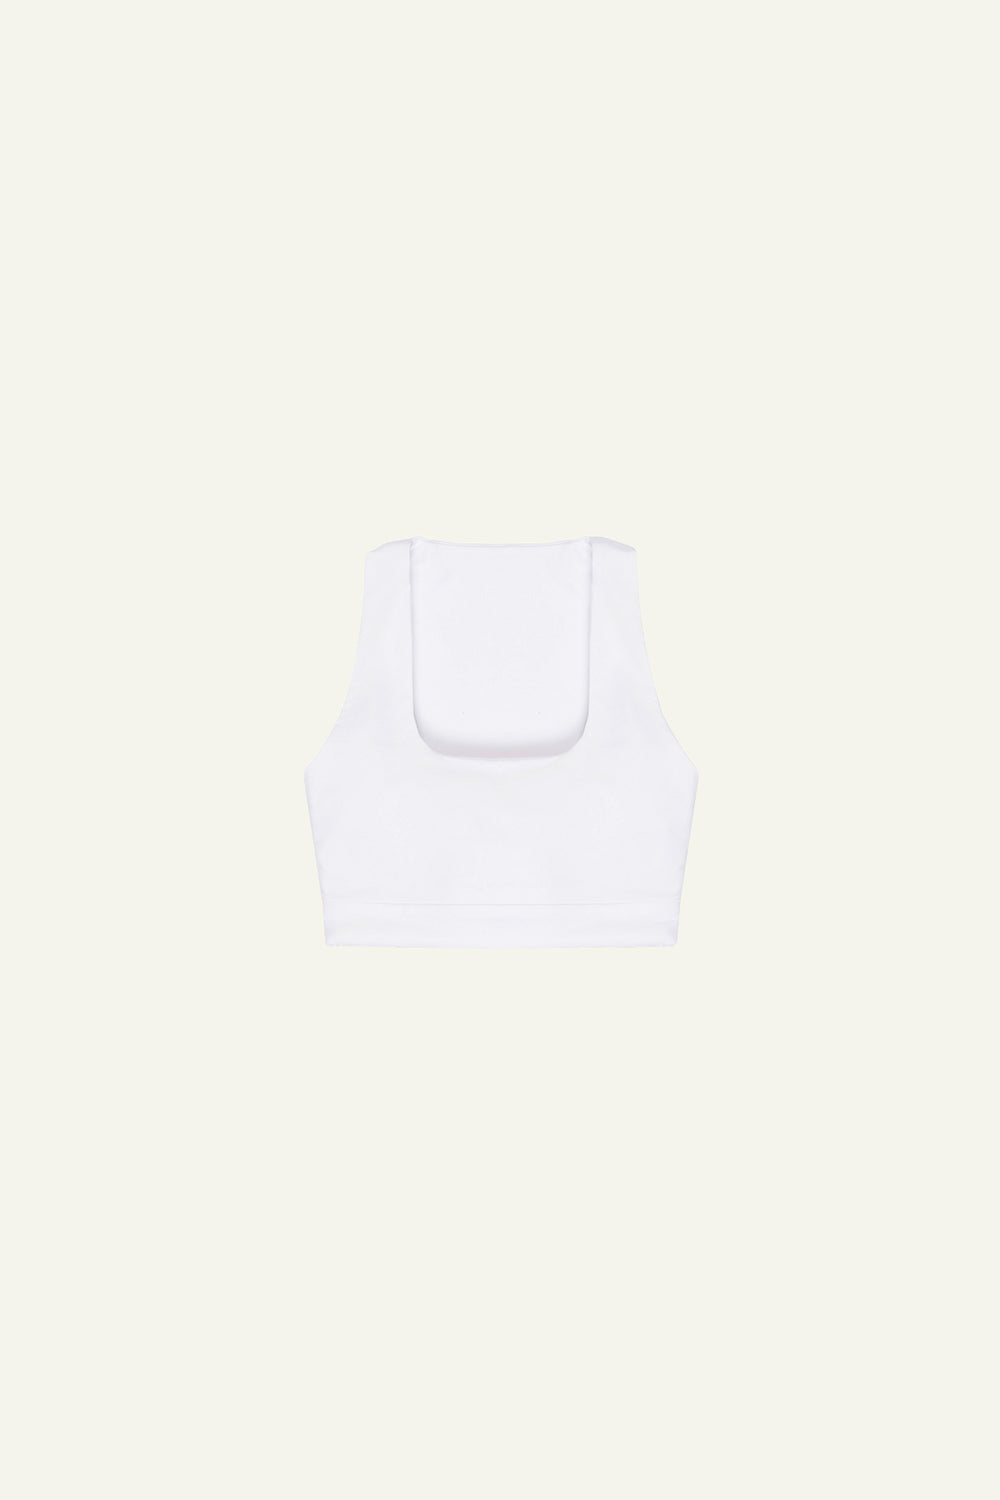  Experience ultimate luxury top with Marta – a Spanish-made, square-neck, crop top, ideal for high-intensity workouts or chic athleisure style. Our advanced sustainable technology offers a cool, breathable, and moisture-wicking design, coupled with UPF50+ sun protection and antibacterial features. 